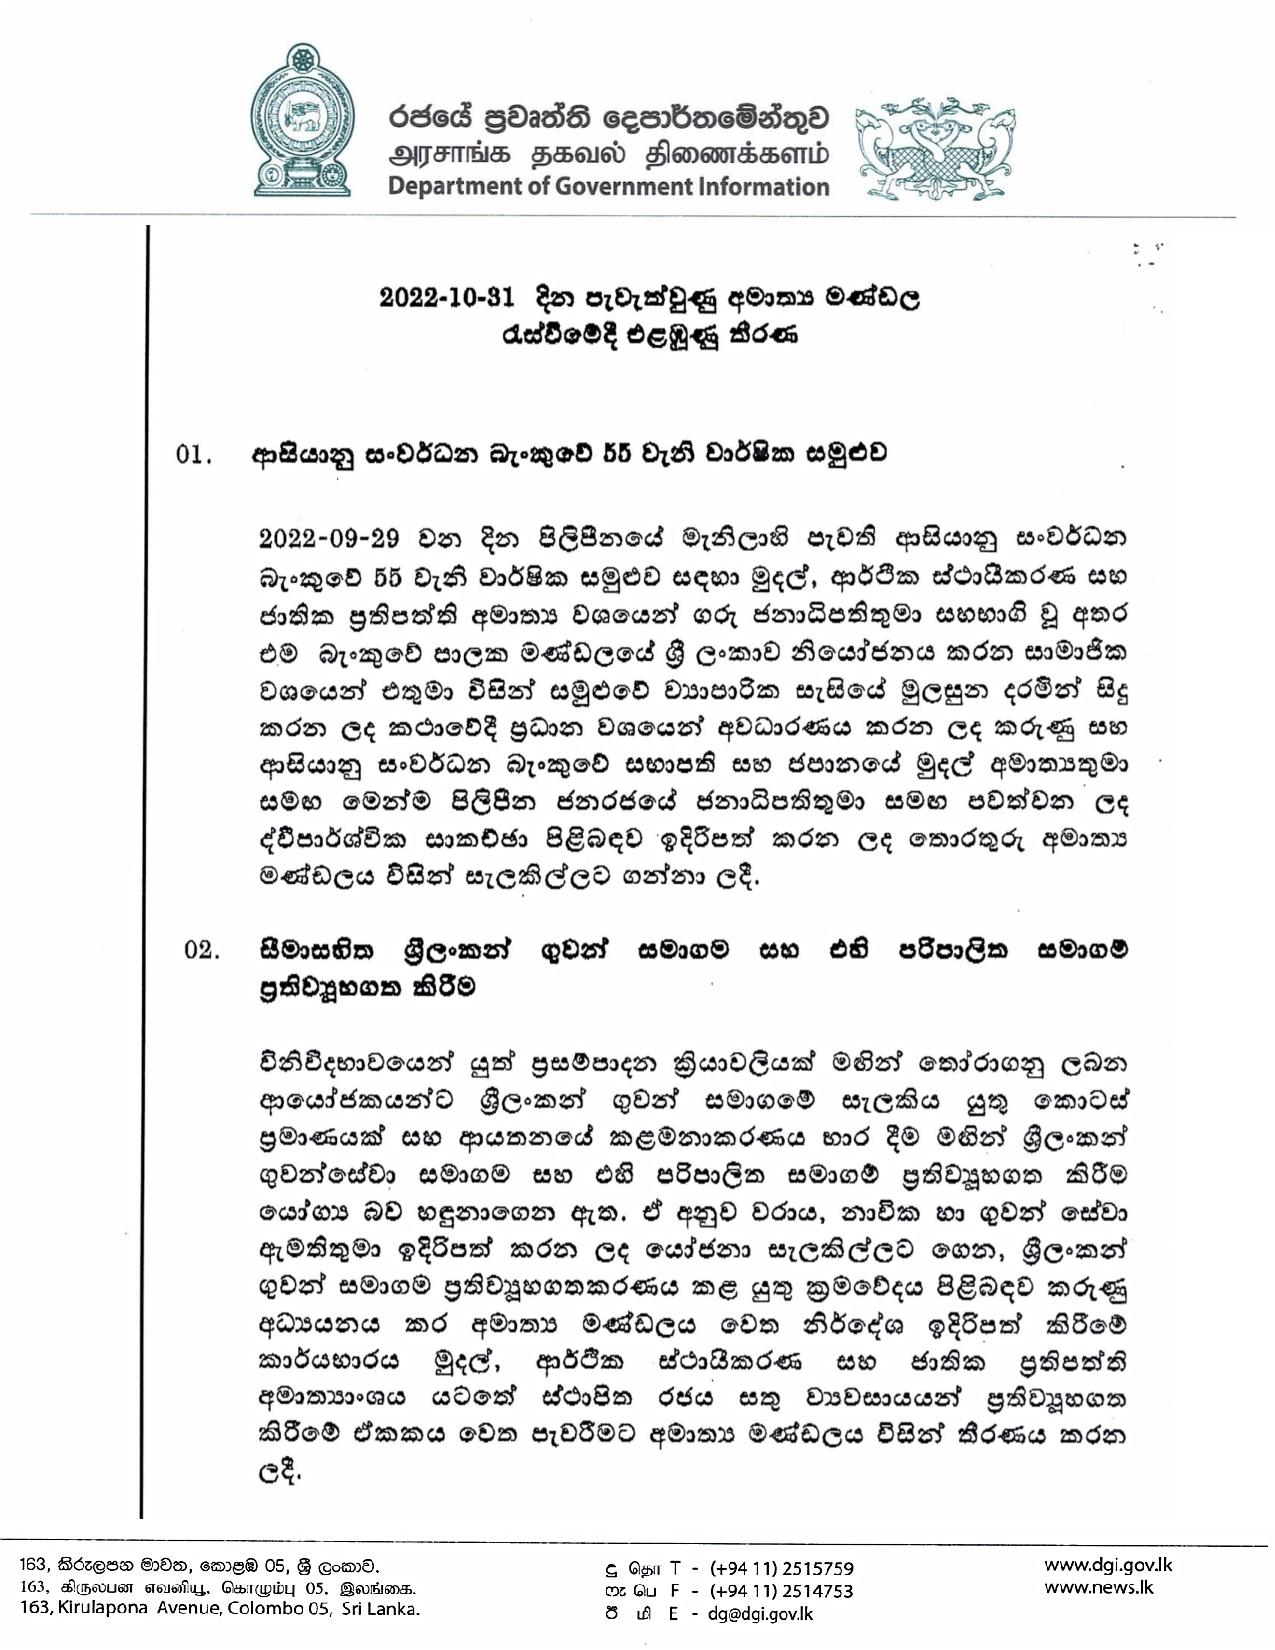 Cabinet Decisions on 31.10.2022 1 page 001